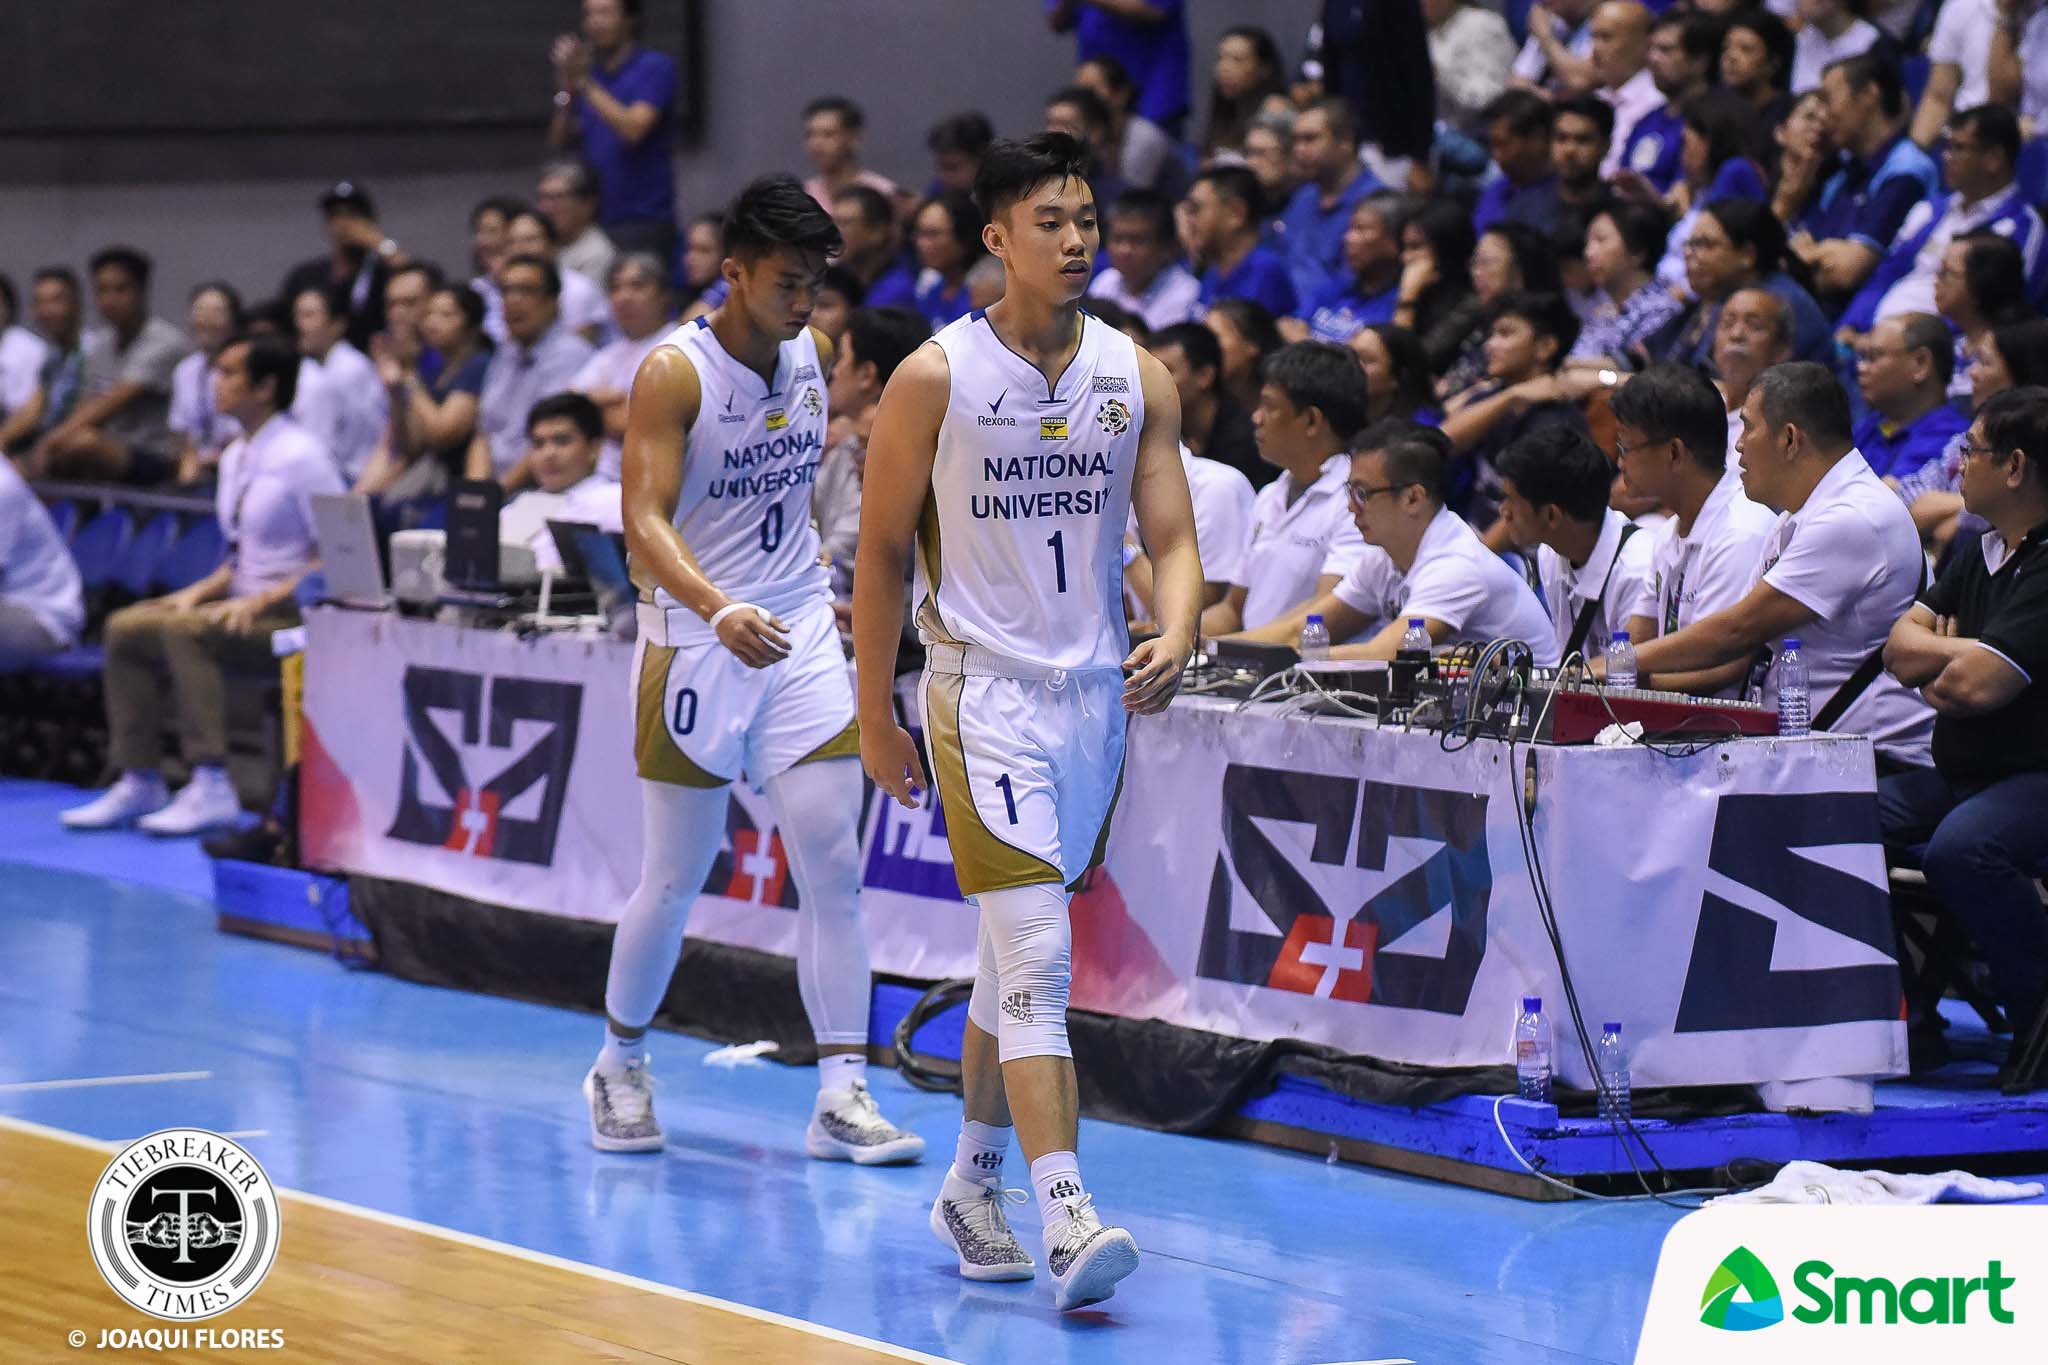 UAAP-81-ADMU-vs.-NU-Dave-Ildefonso-9574 Dave Ildefonso glad he made the right decision to come back home to Ateneo ADMU Basketball News UAAP  - philippine sports news